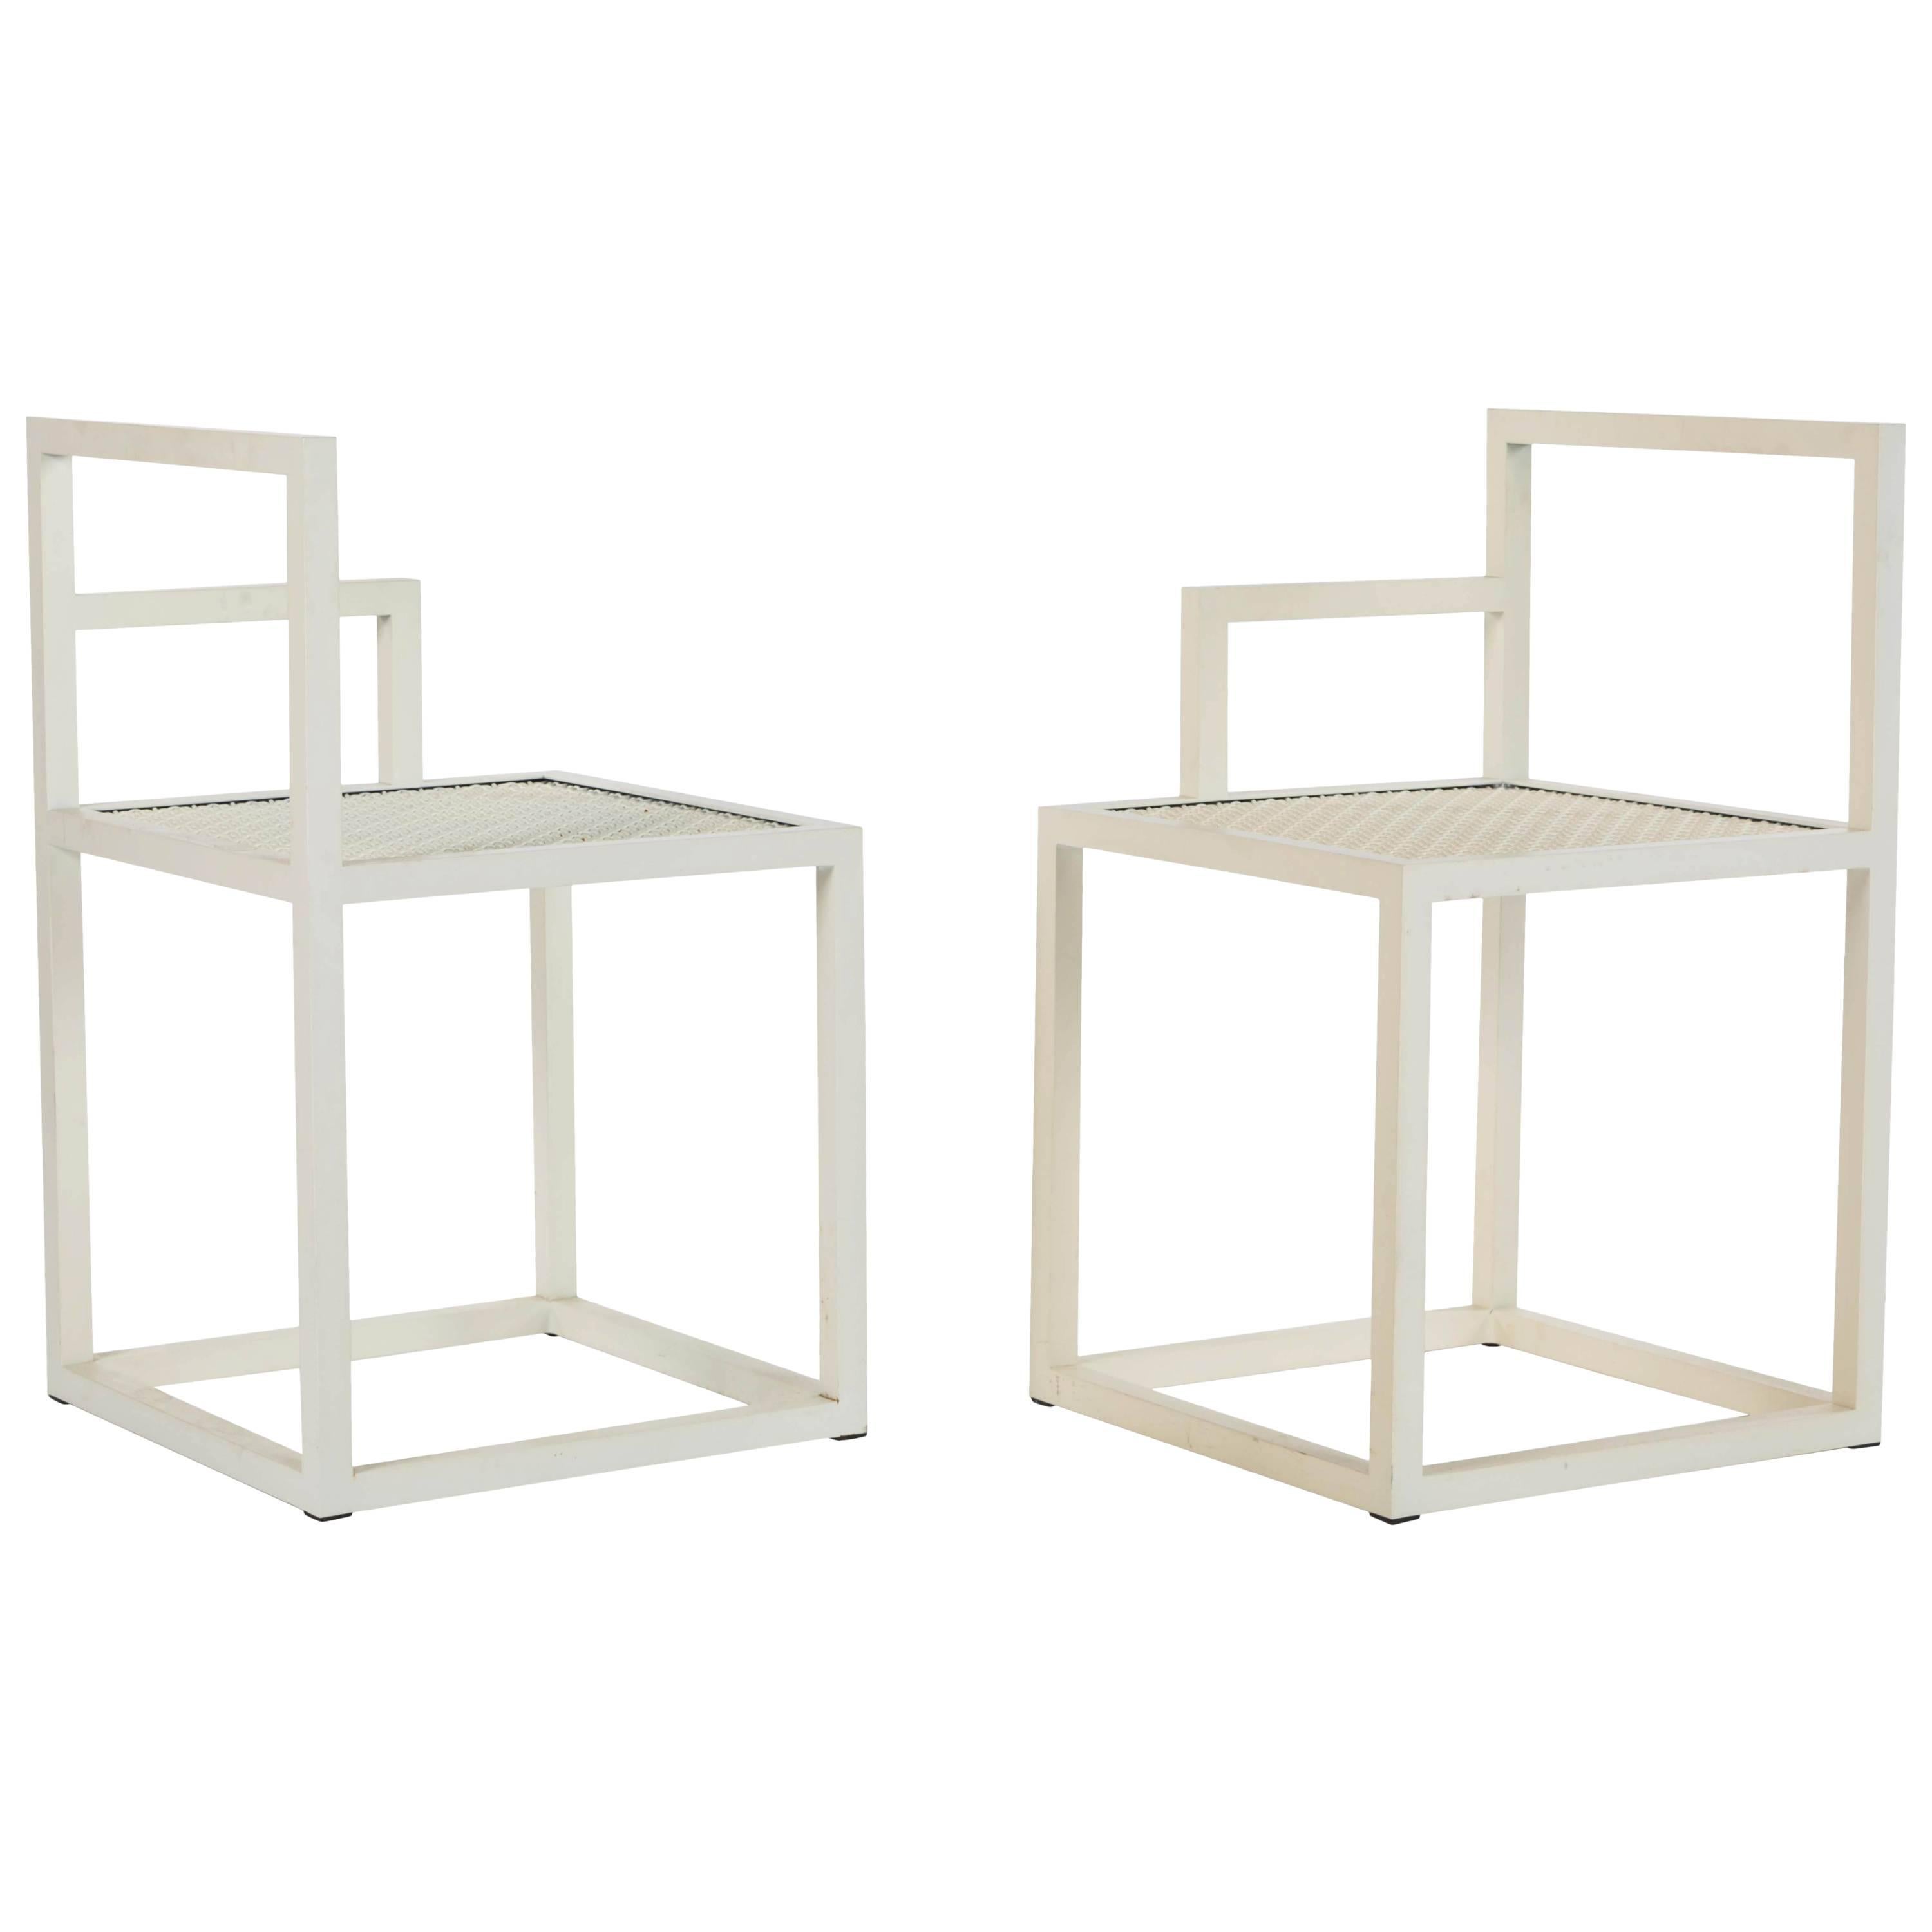 Pair of White Modern Powder Coated Steel Prototype Sol Chairs by Jonathan Nesci